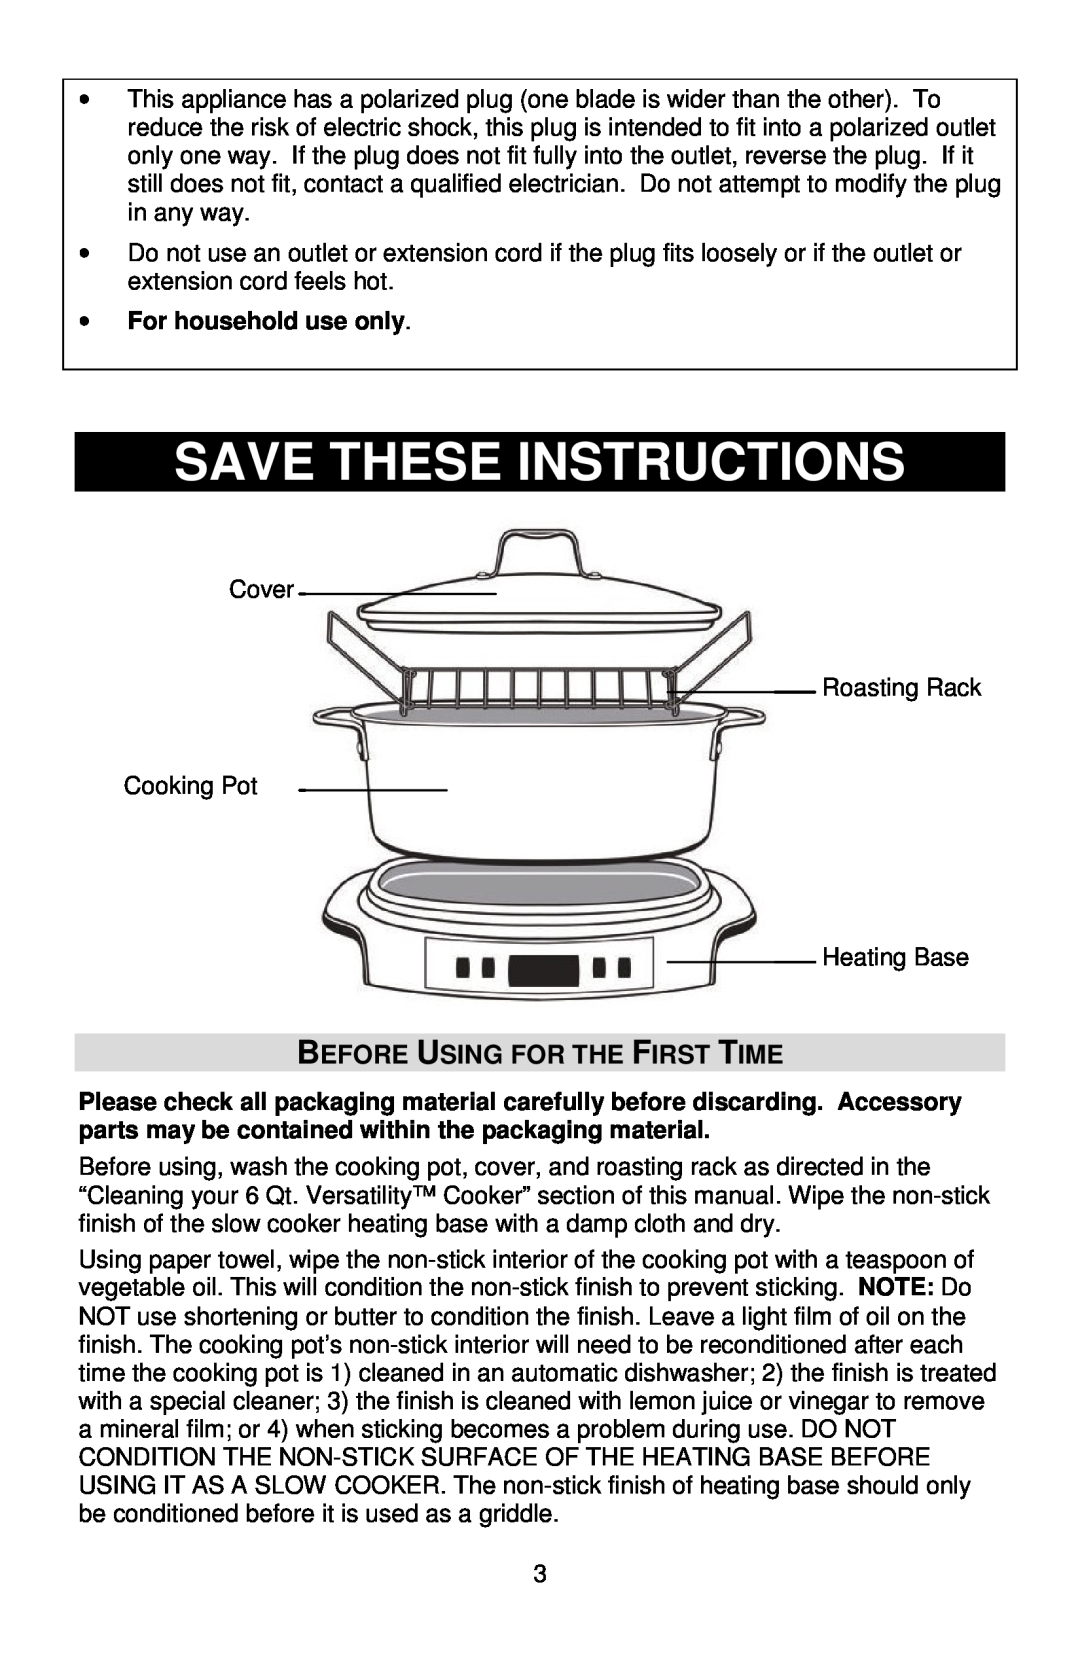 West Bend L5800, 84966 instruction manual Save These Instructions, Before Using For The First Time, For household use only 